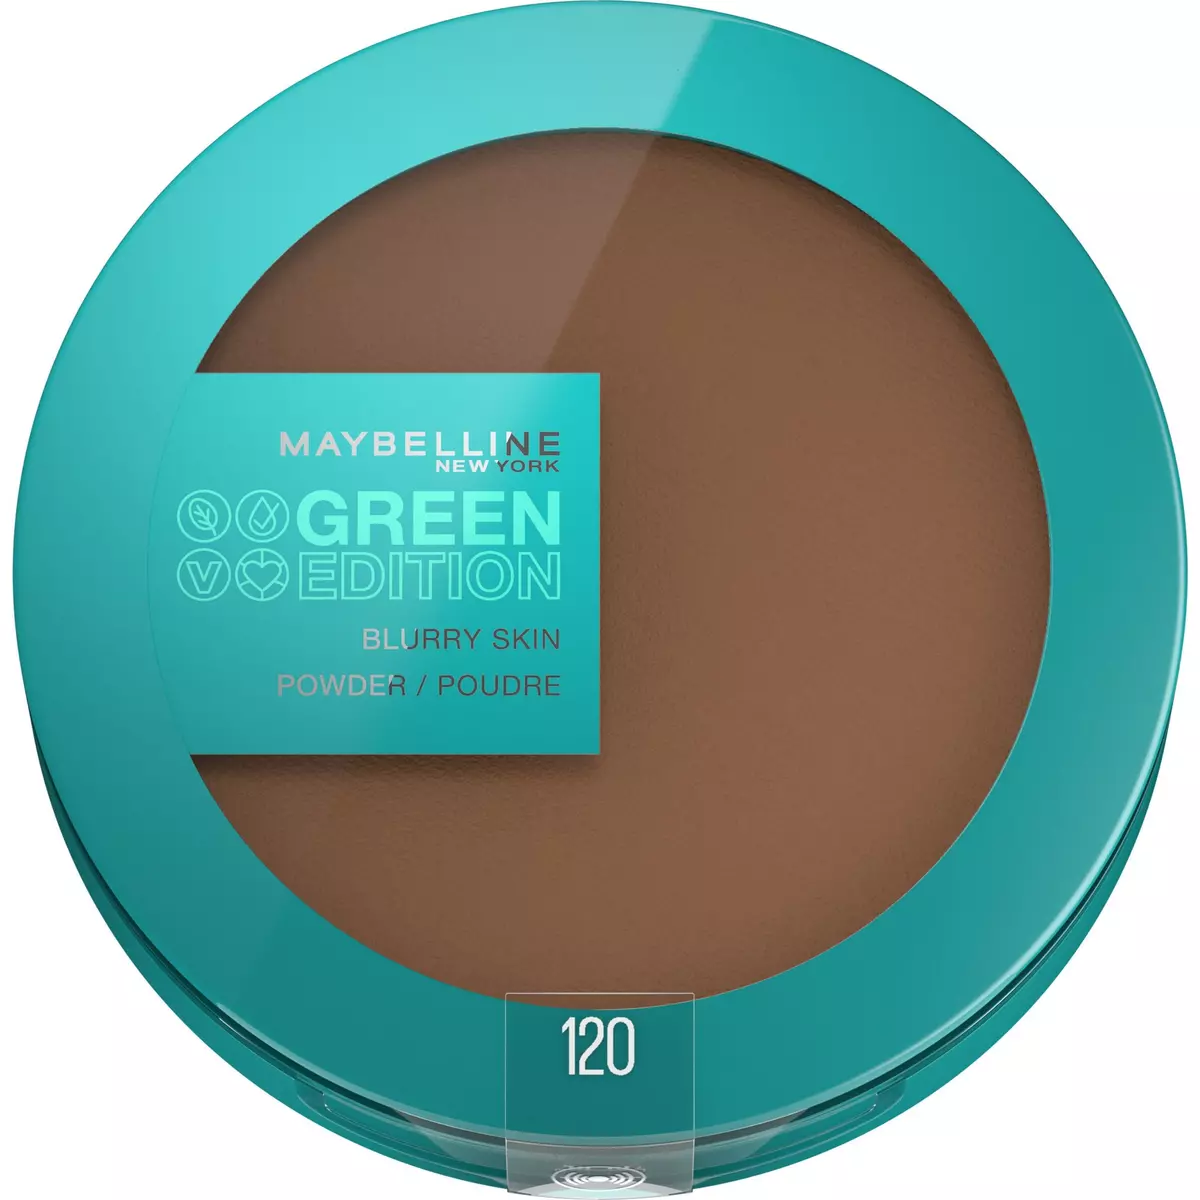 MAYBELLINE Green Edition Poudre teint 120 1 pièce